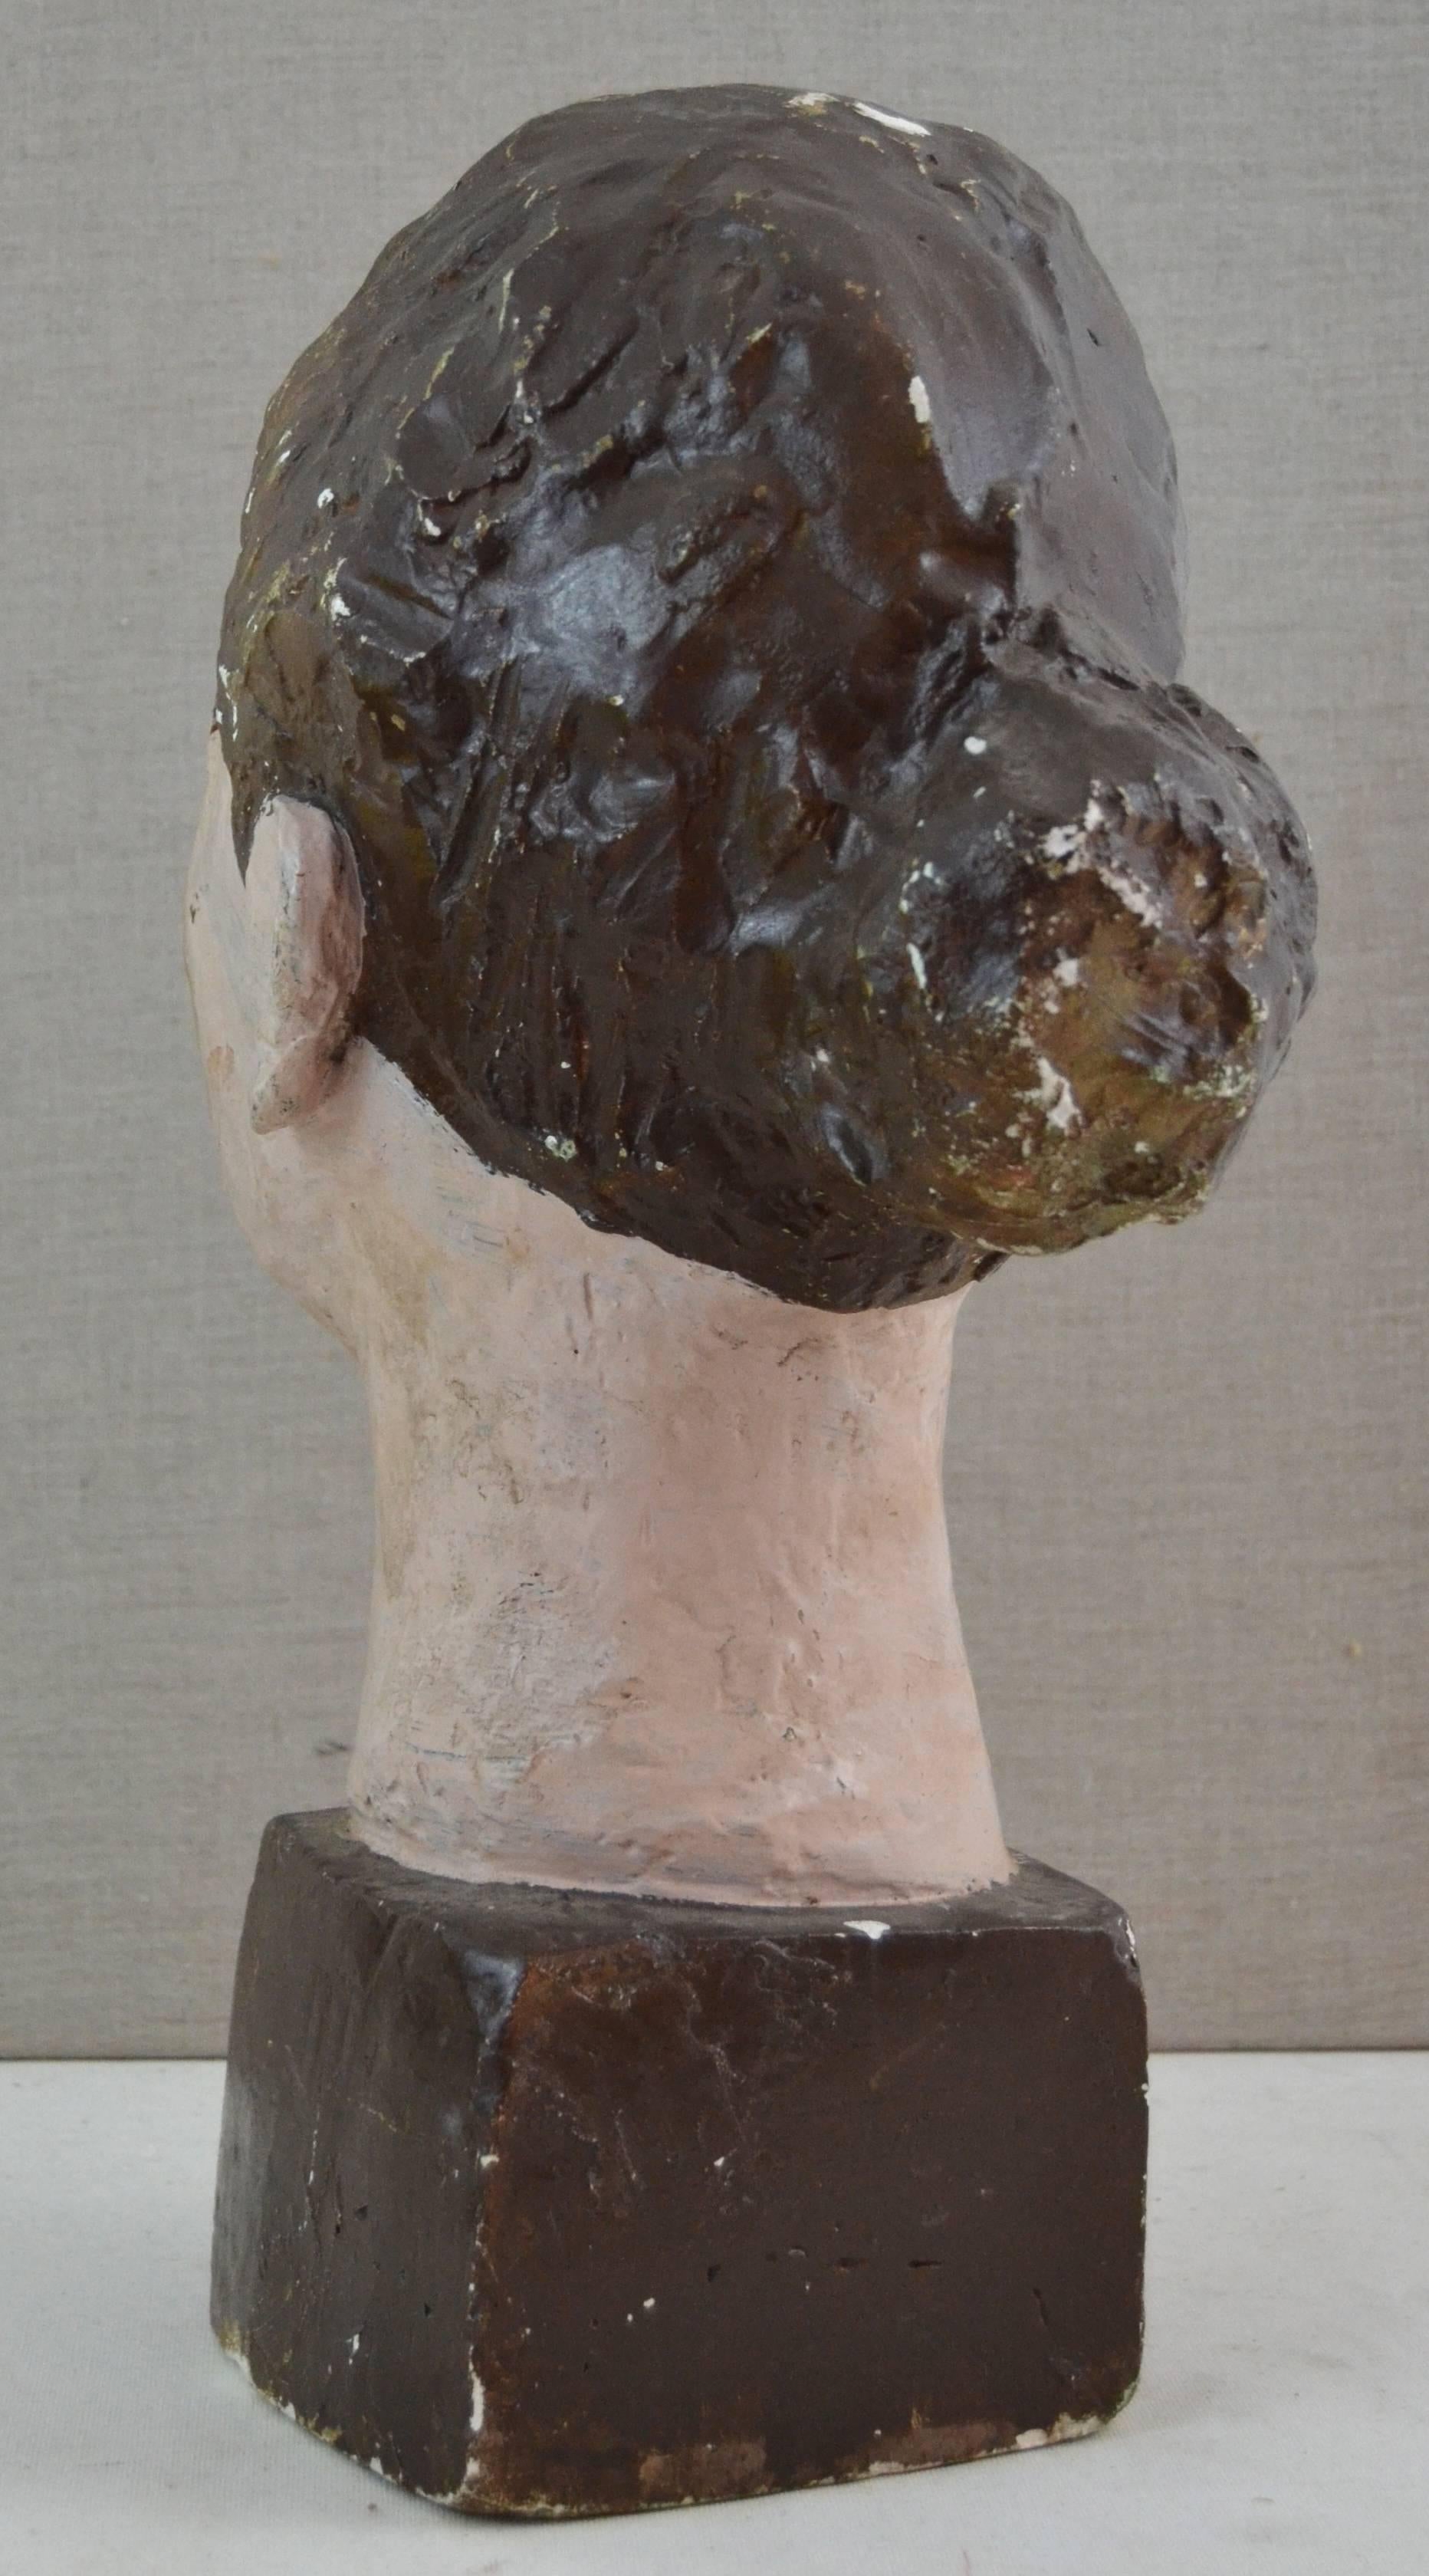 Sculpted and polychrome plaster bust of woman dating from the 1920s. Wonderful surface and particularly strong sculptural and graphic presence. Unknown artist and origin. Some paint loss and a repaired chip to front corner, neither a distraction.